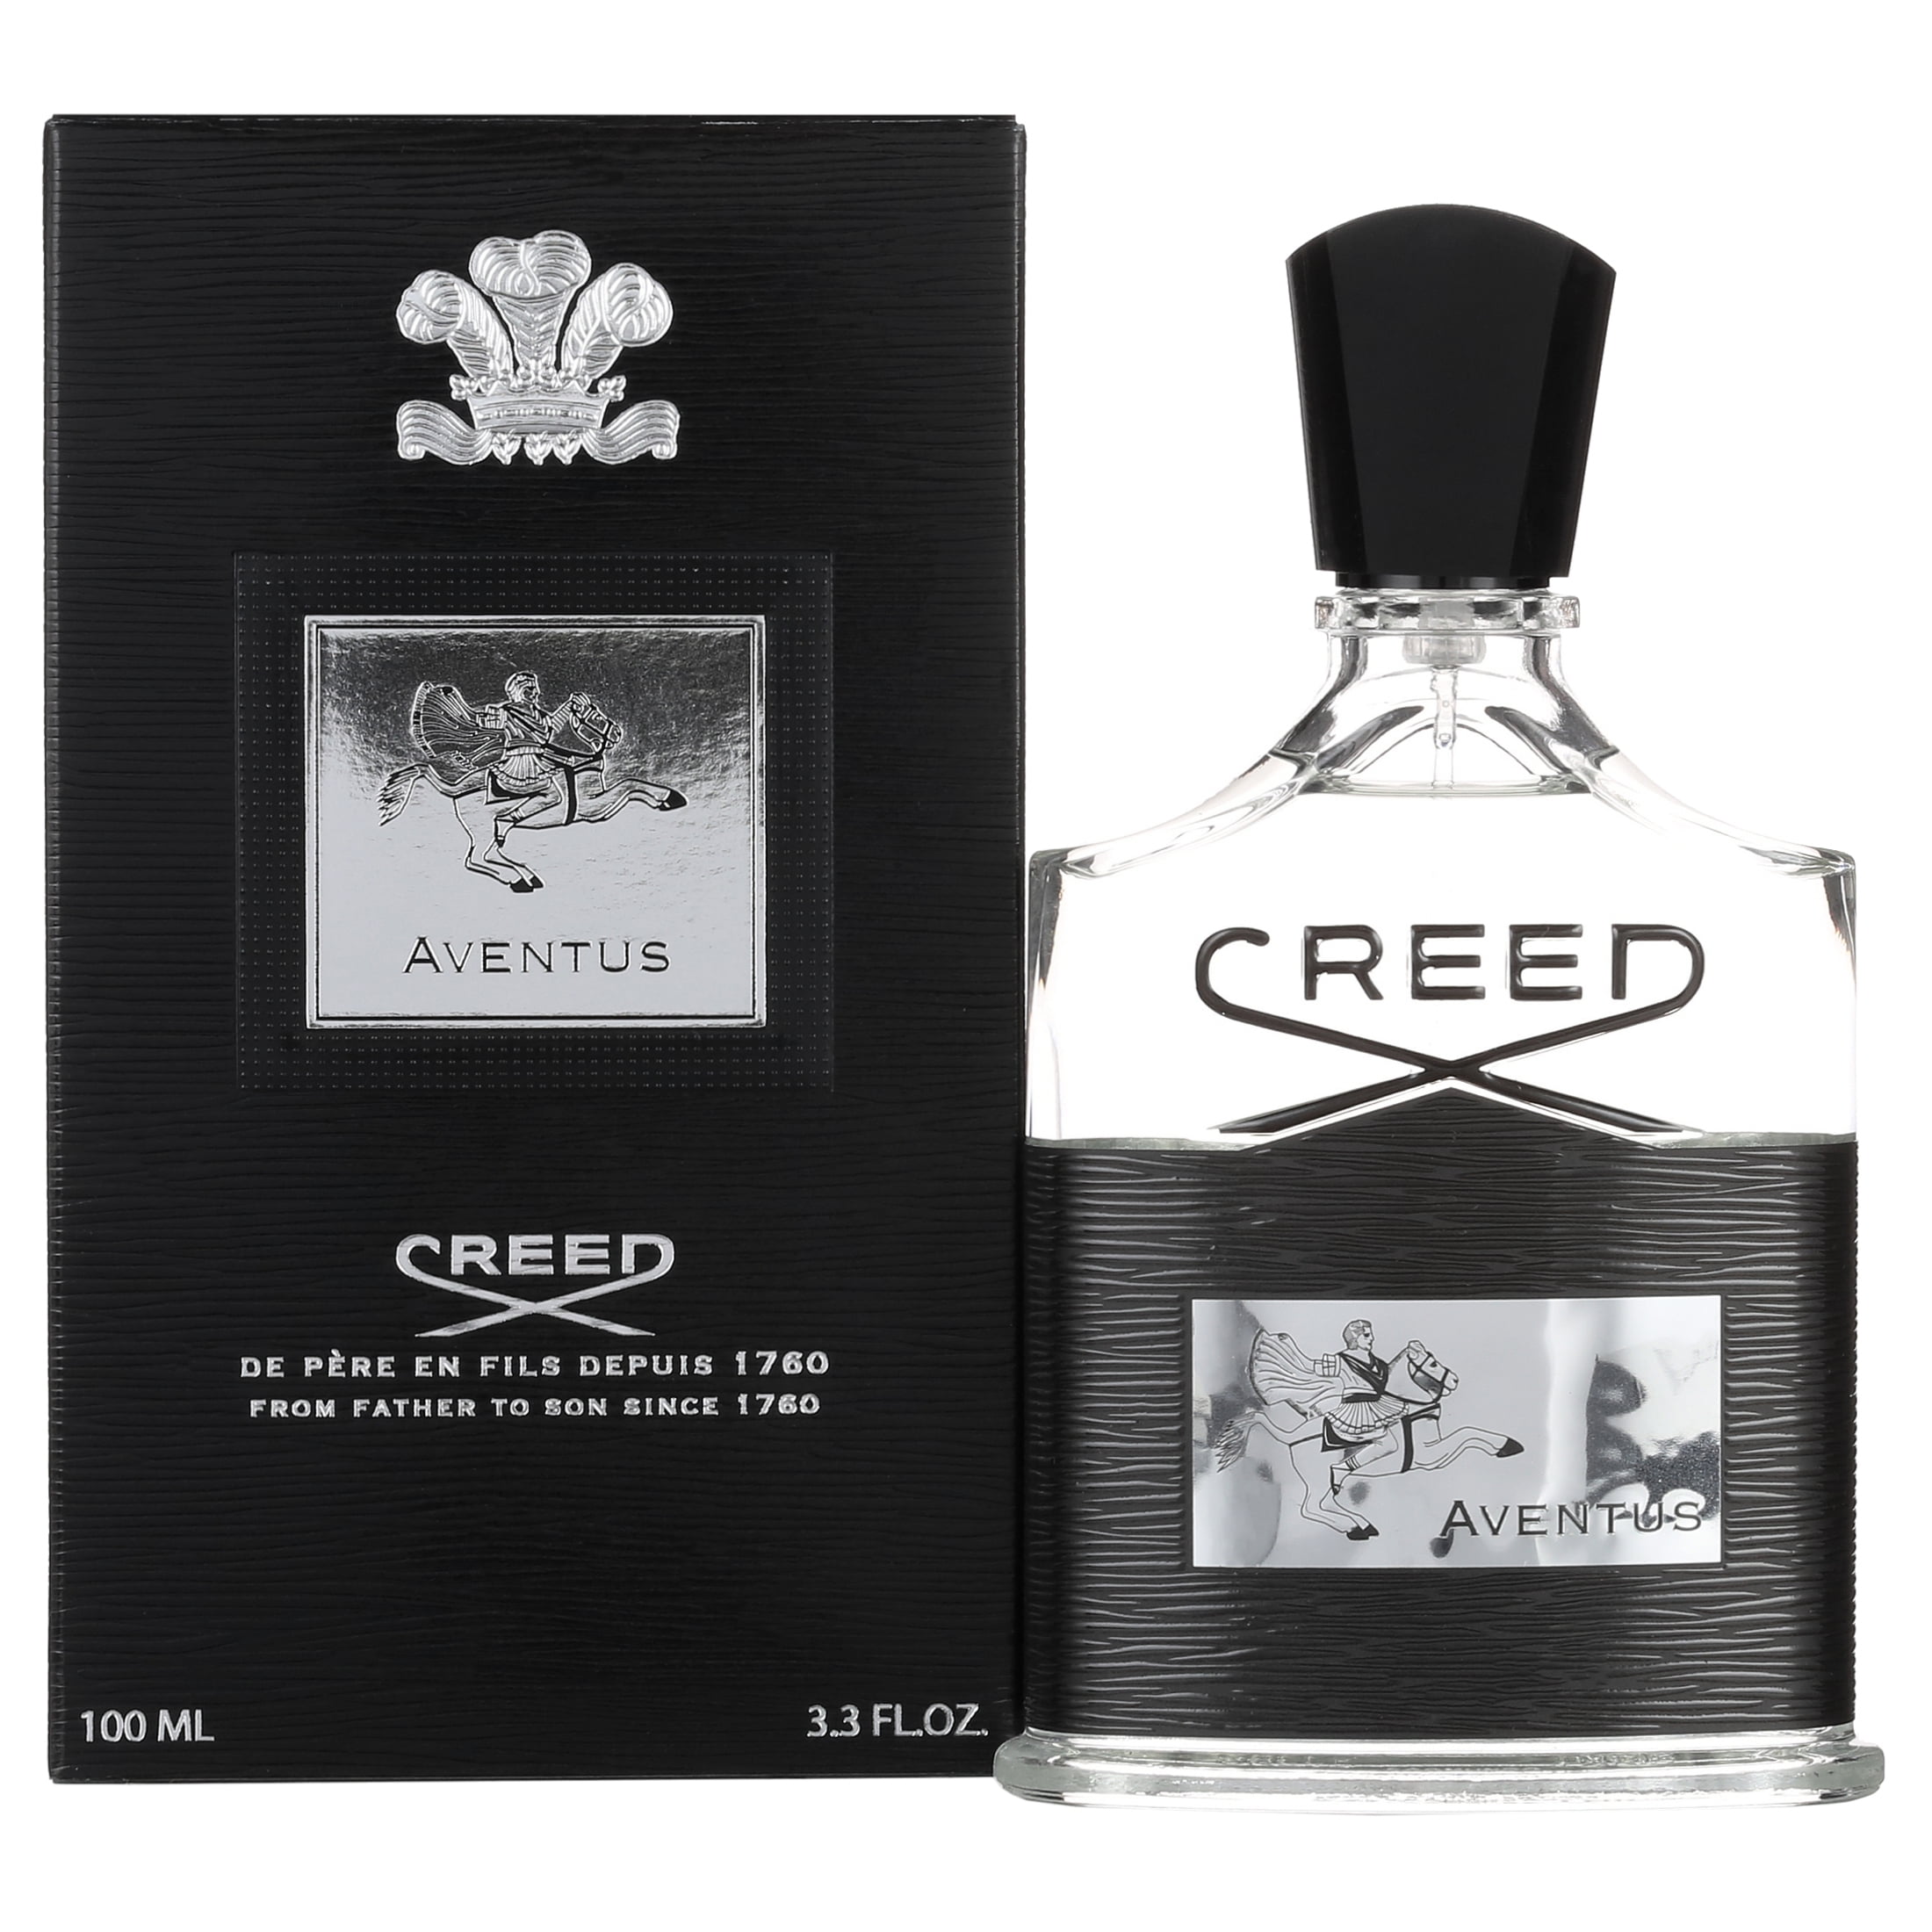  Creed Aventus Cologne, Men's Luxury Cologne, Dry Woods, Fresh &  Citrus Fruity Fragrance, 100ML : Video Games